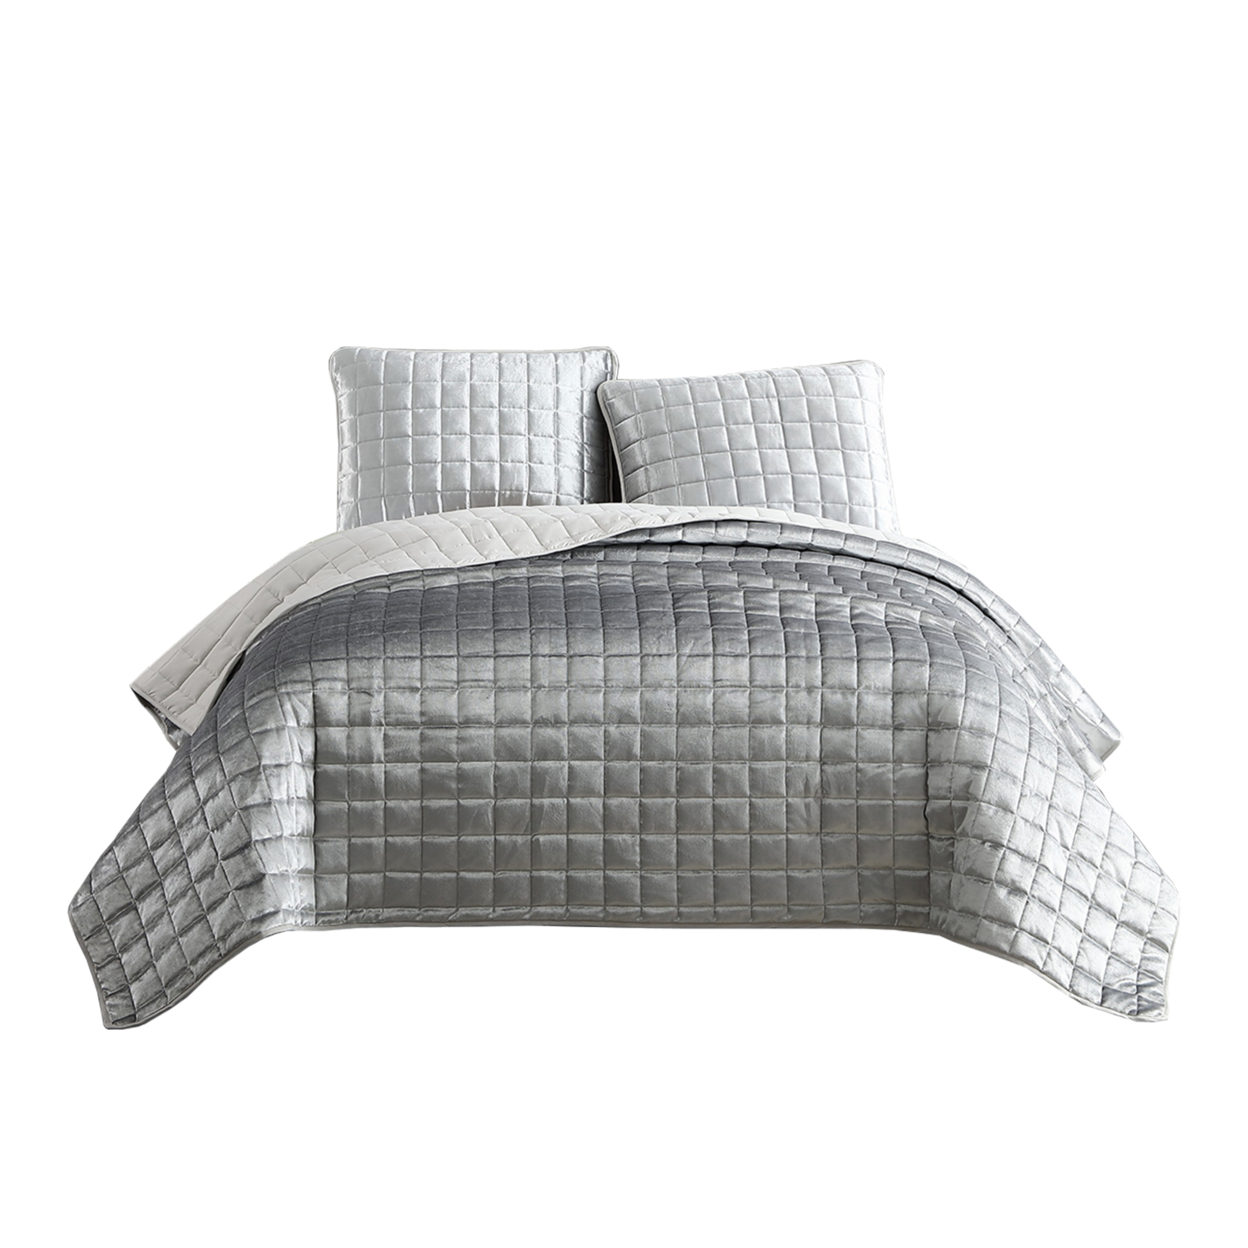 3 Piece Queen Size Coverlet Set With Stitched Square Pattern, Silver- Saltoro Sherpi